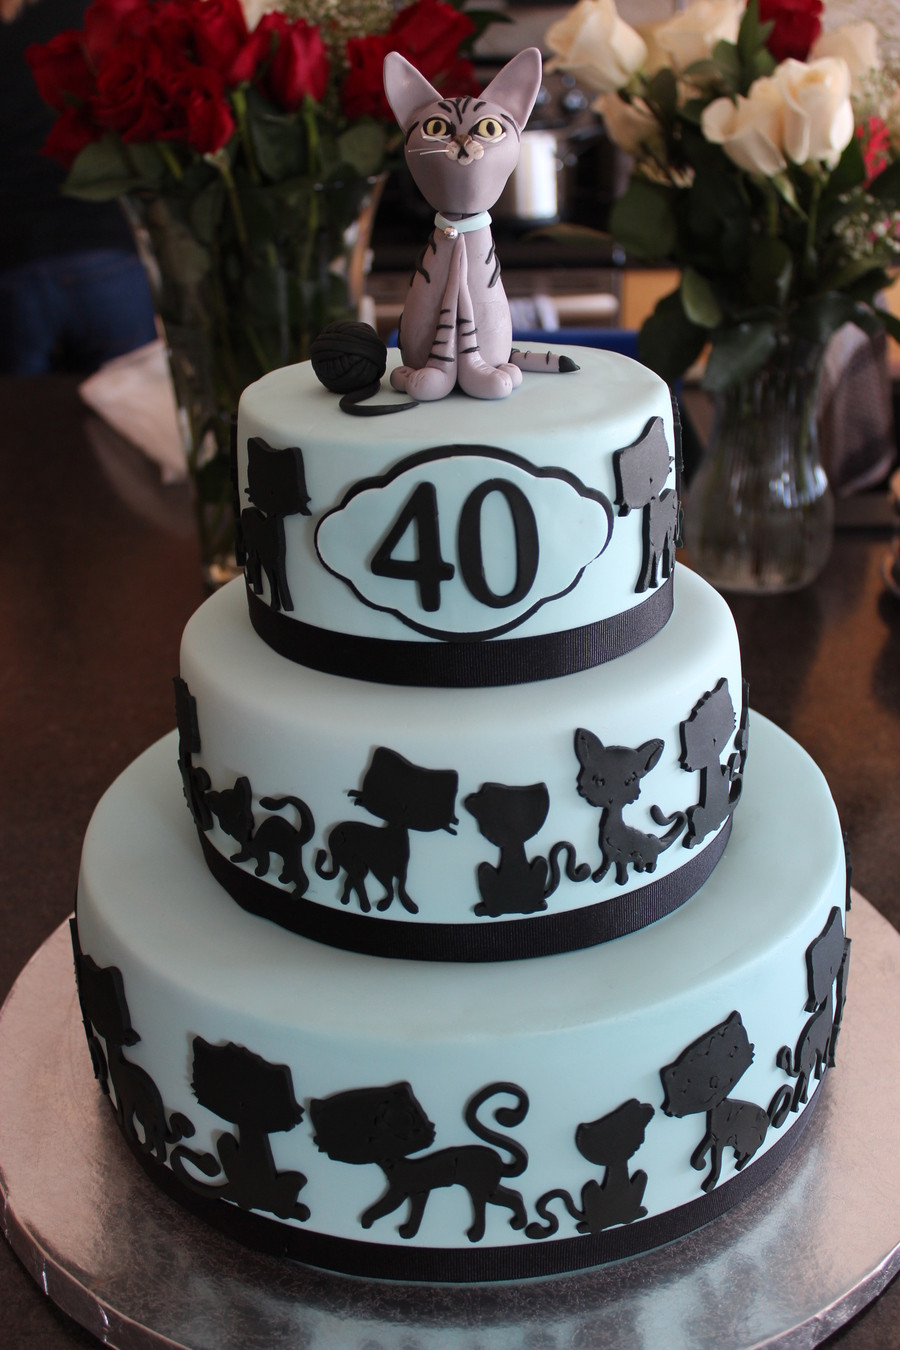 40th Birthday Cake
 40Th Birthday Cake Client Requested That The Cake Have 40